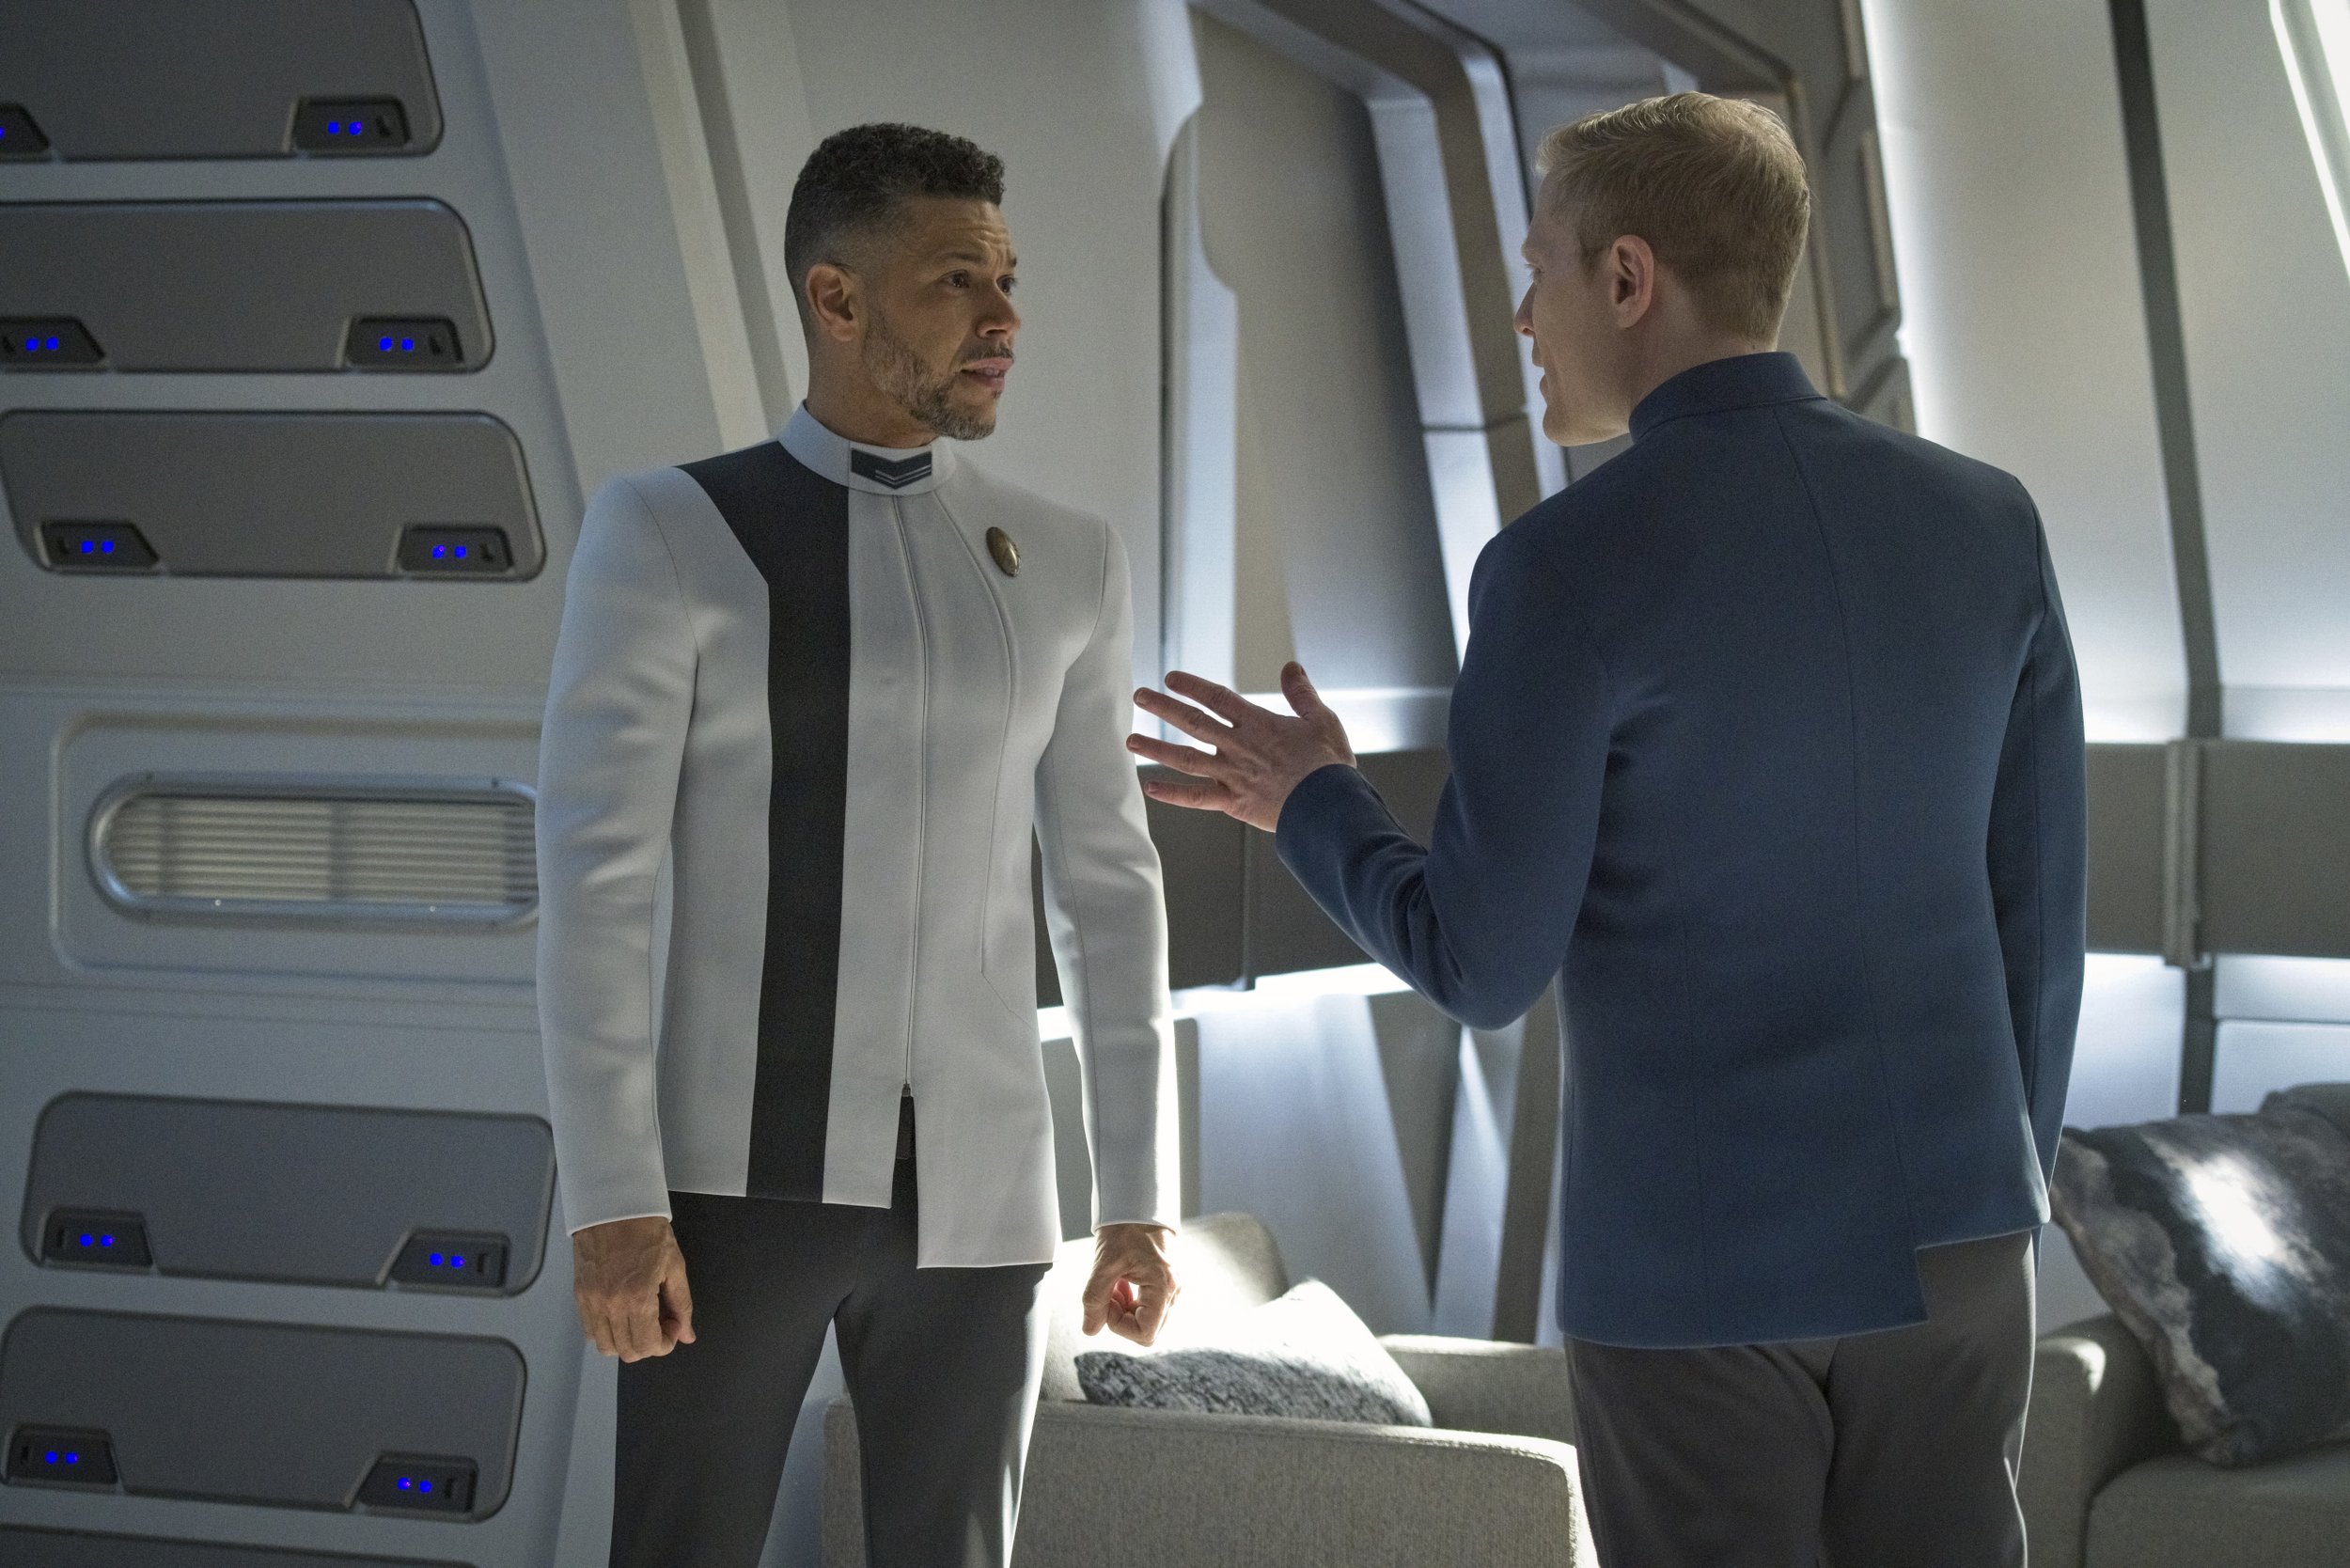   Pictured: Wilson Cruz as Culber and Anthony Rapp as Stamets of the Paramount+ original series STAR TREK: DISCOVERY. Photo Cr: Michael Gibson/Paramount+ (C) 2021 CBS Interactive. All Rights Reserved.  